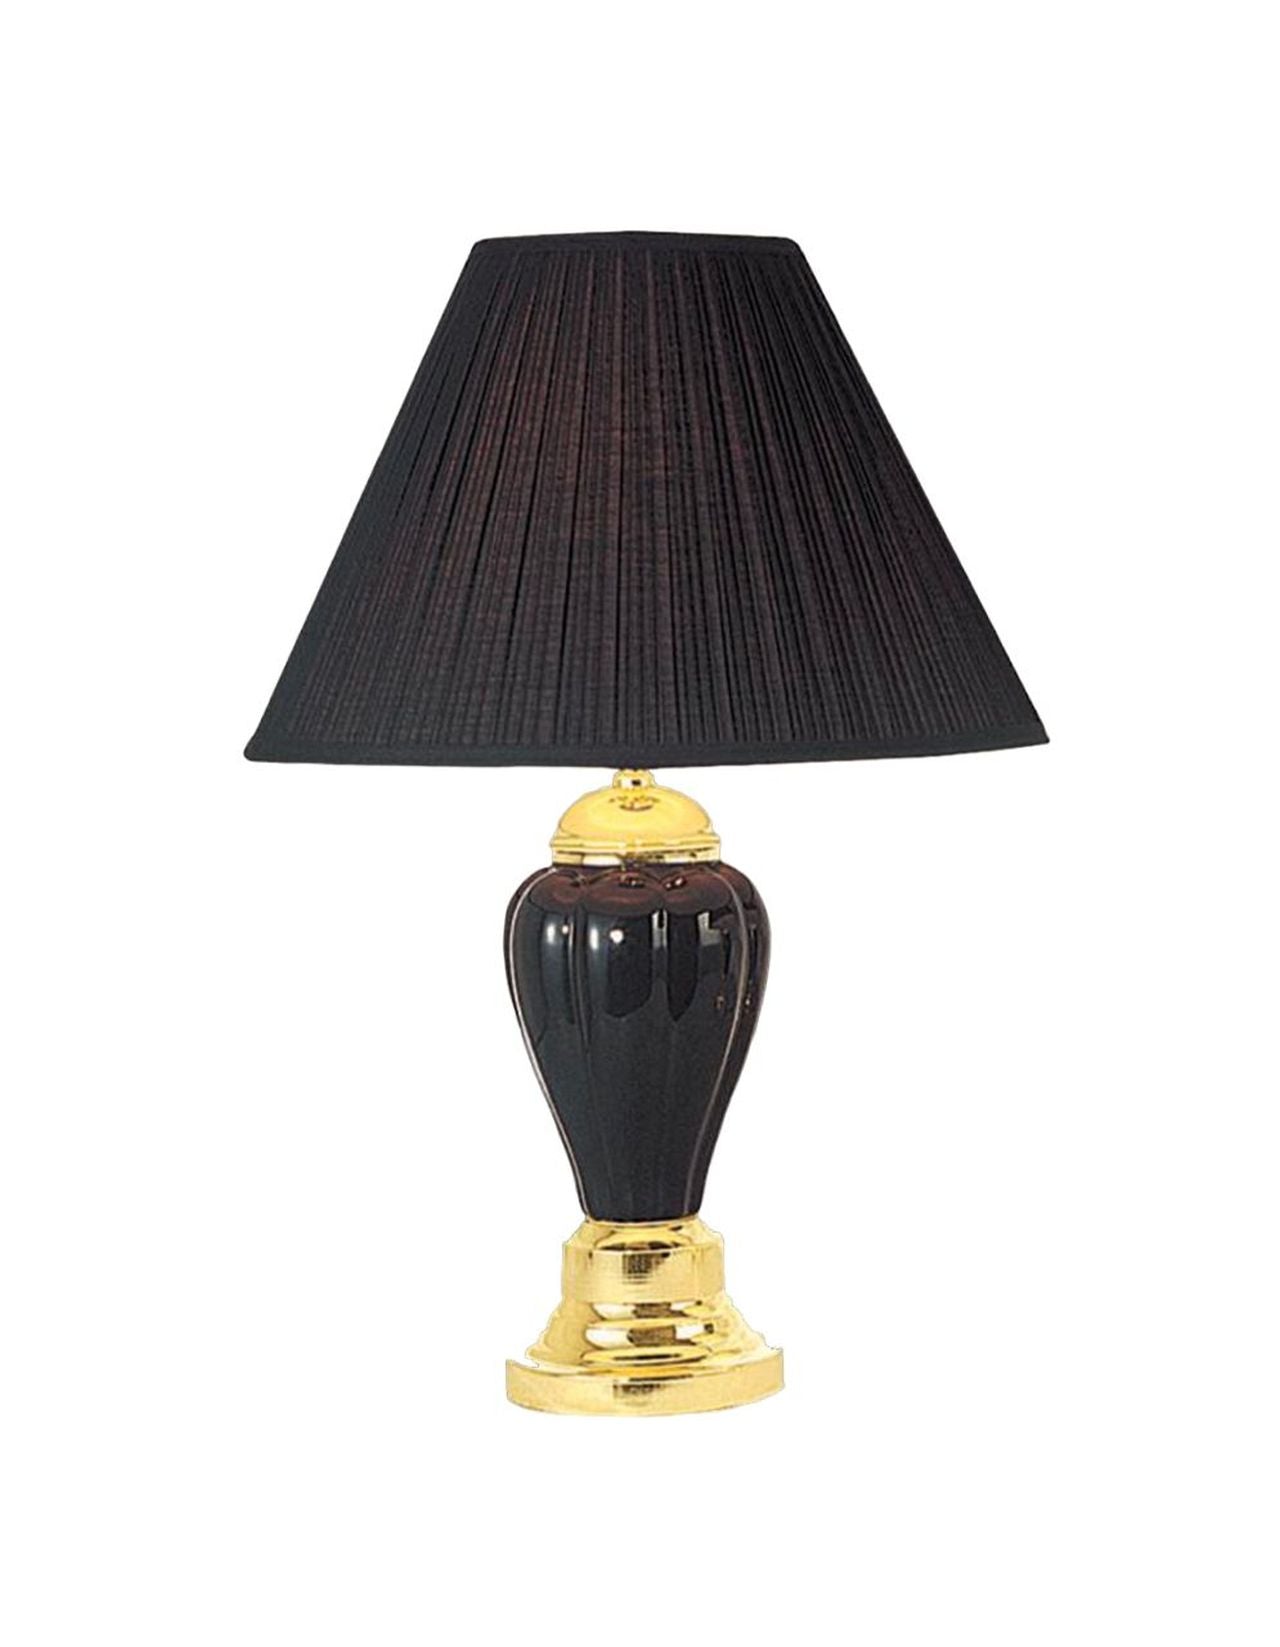 27" Black and Gold Ceramic Urn  Table Lamp With Black Empire Shade